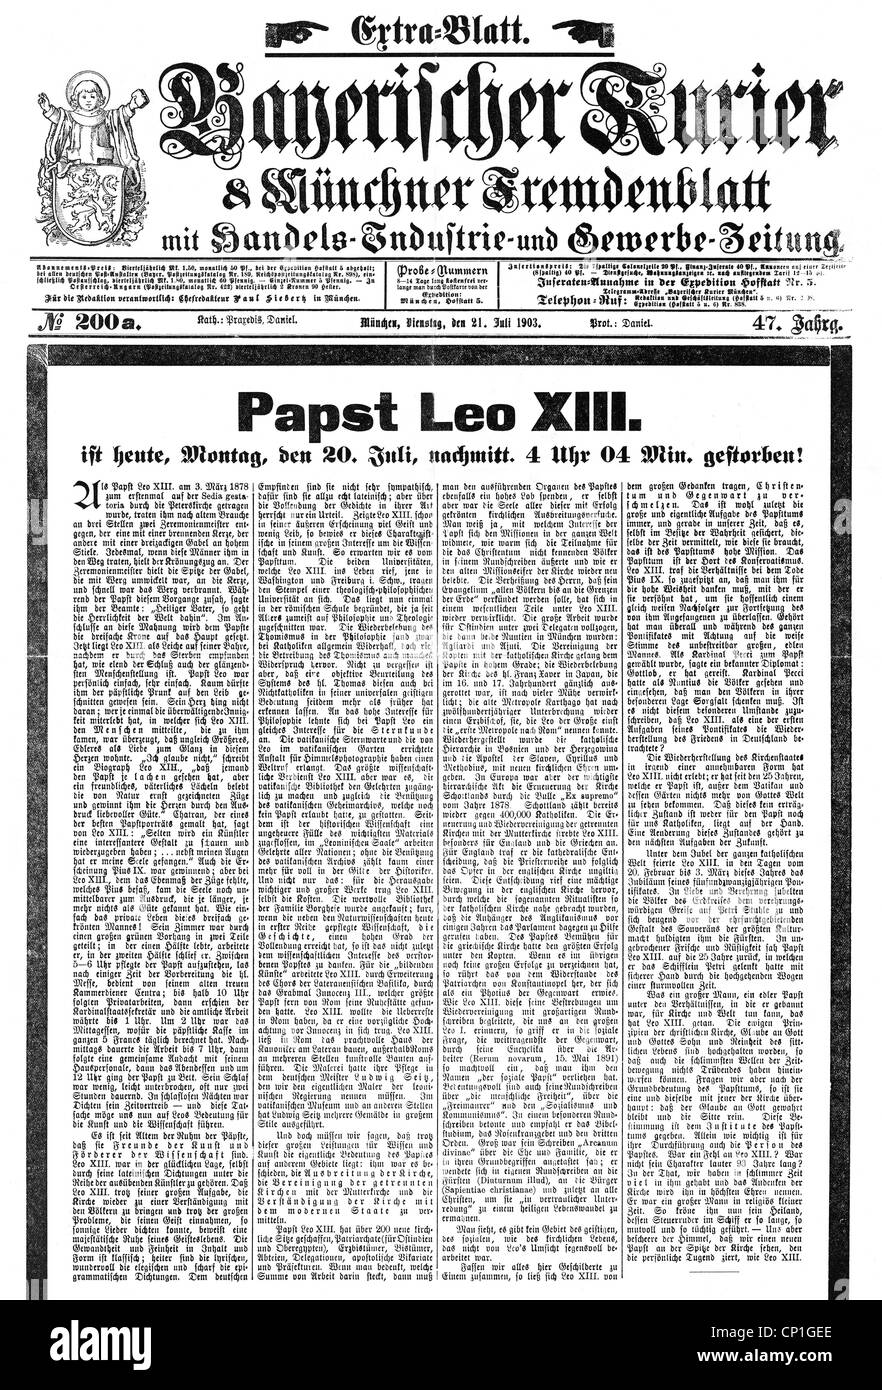 press, magazines / journals, 'Bayerischer Kurier und Muenchner Fremdenblatt', volume 47, no. 200 a, Munich, 21.7.1903, special edition, death of Pope Leo XIII., , Additional-Rights-Clearences-Not Available Stock Photo